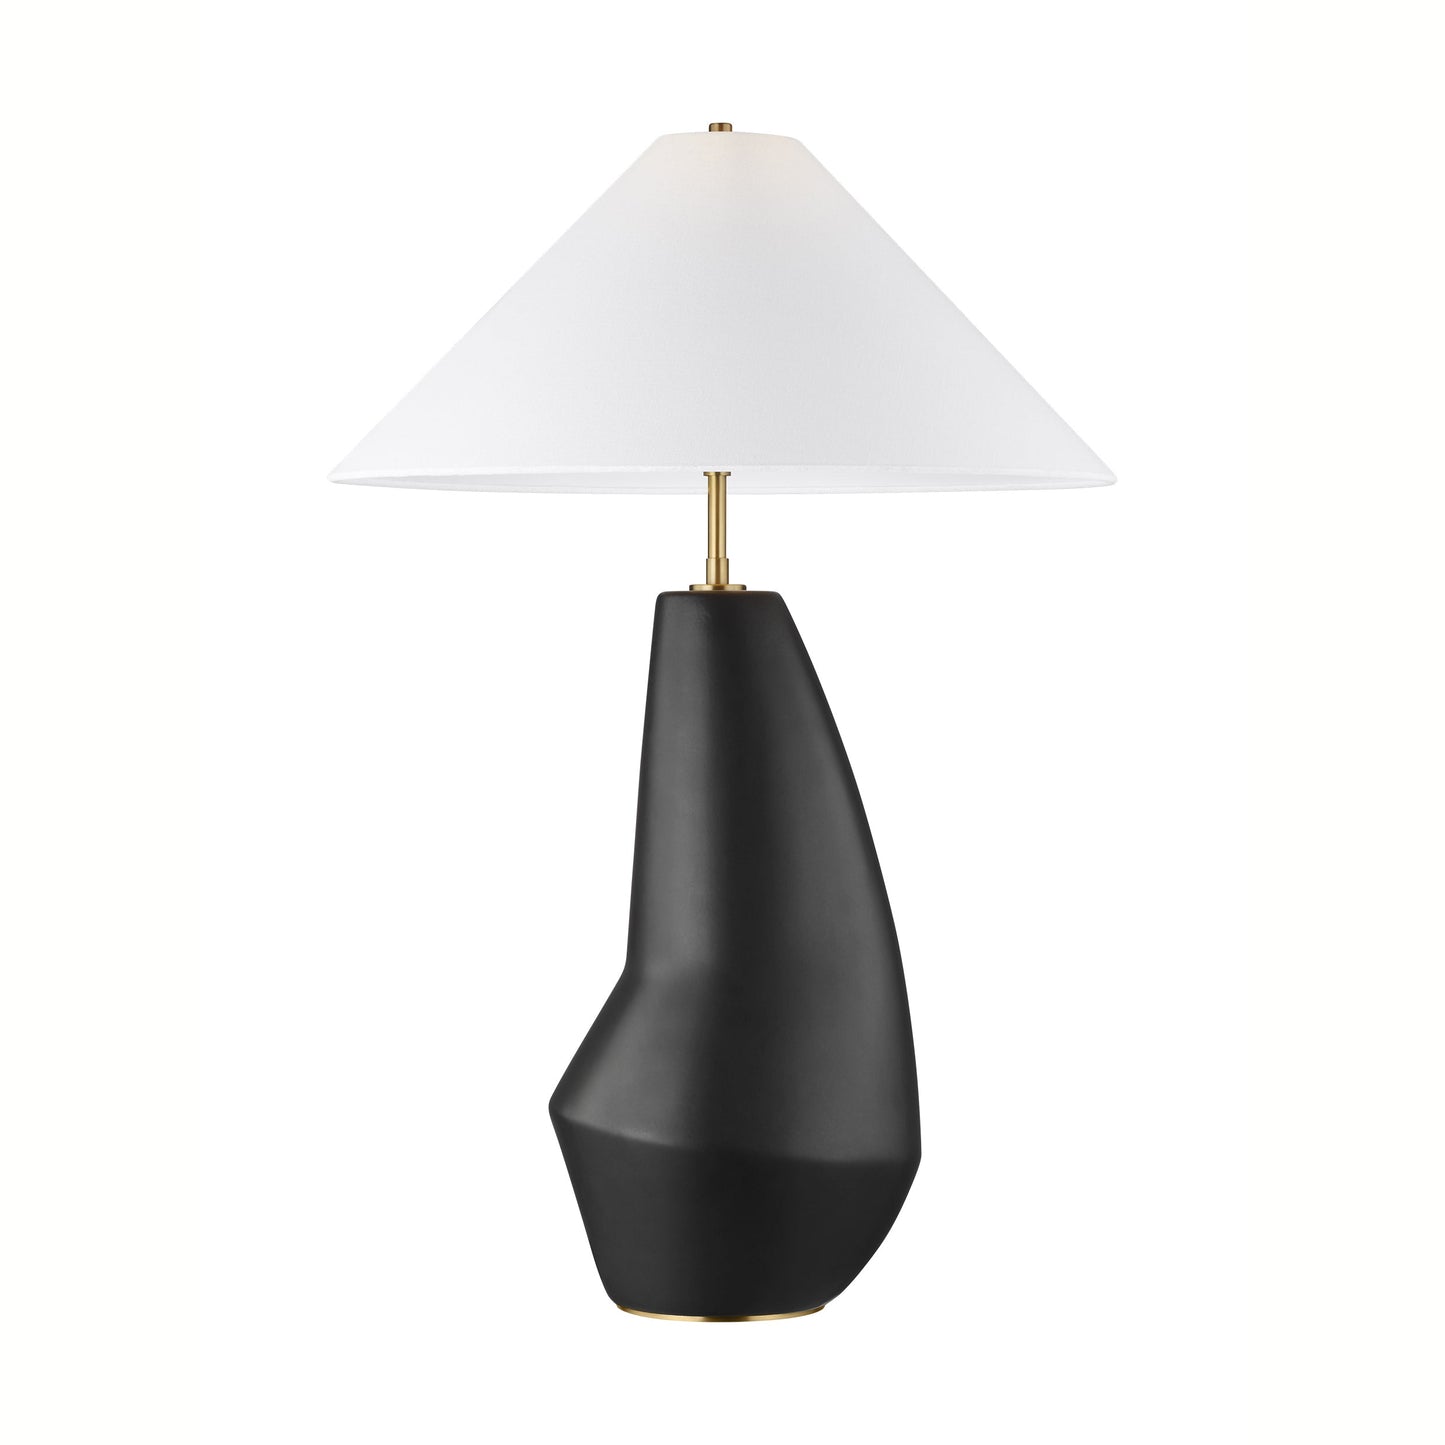 Kelly Wearstler Contour Tall Table Lamp